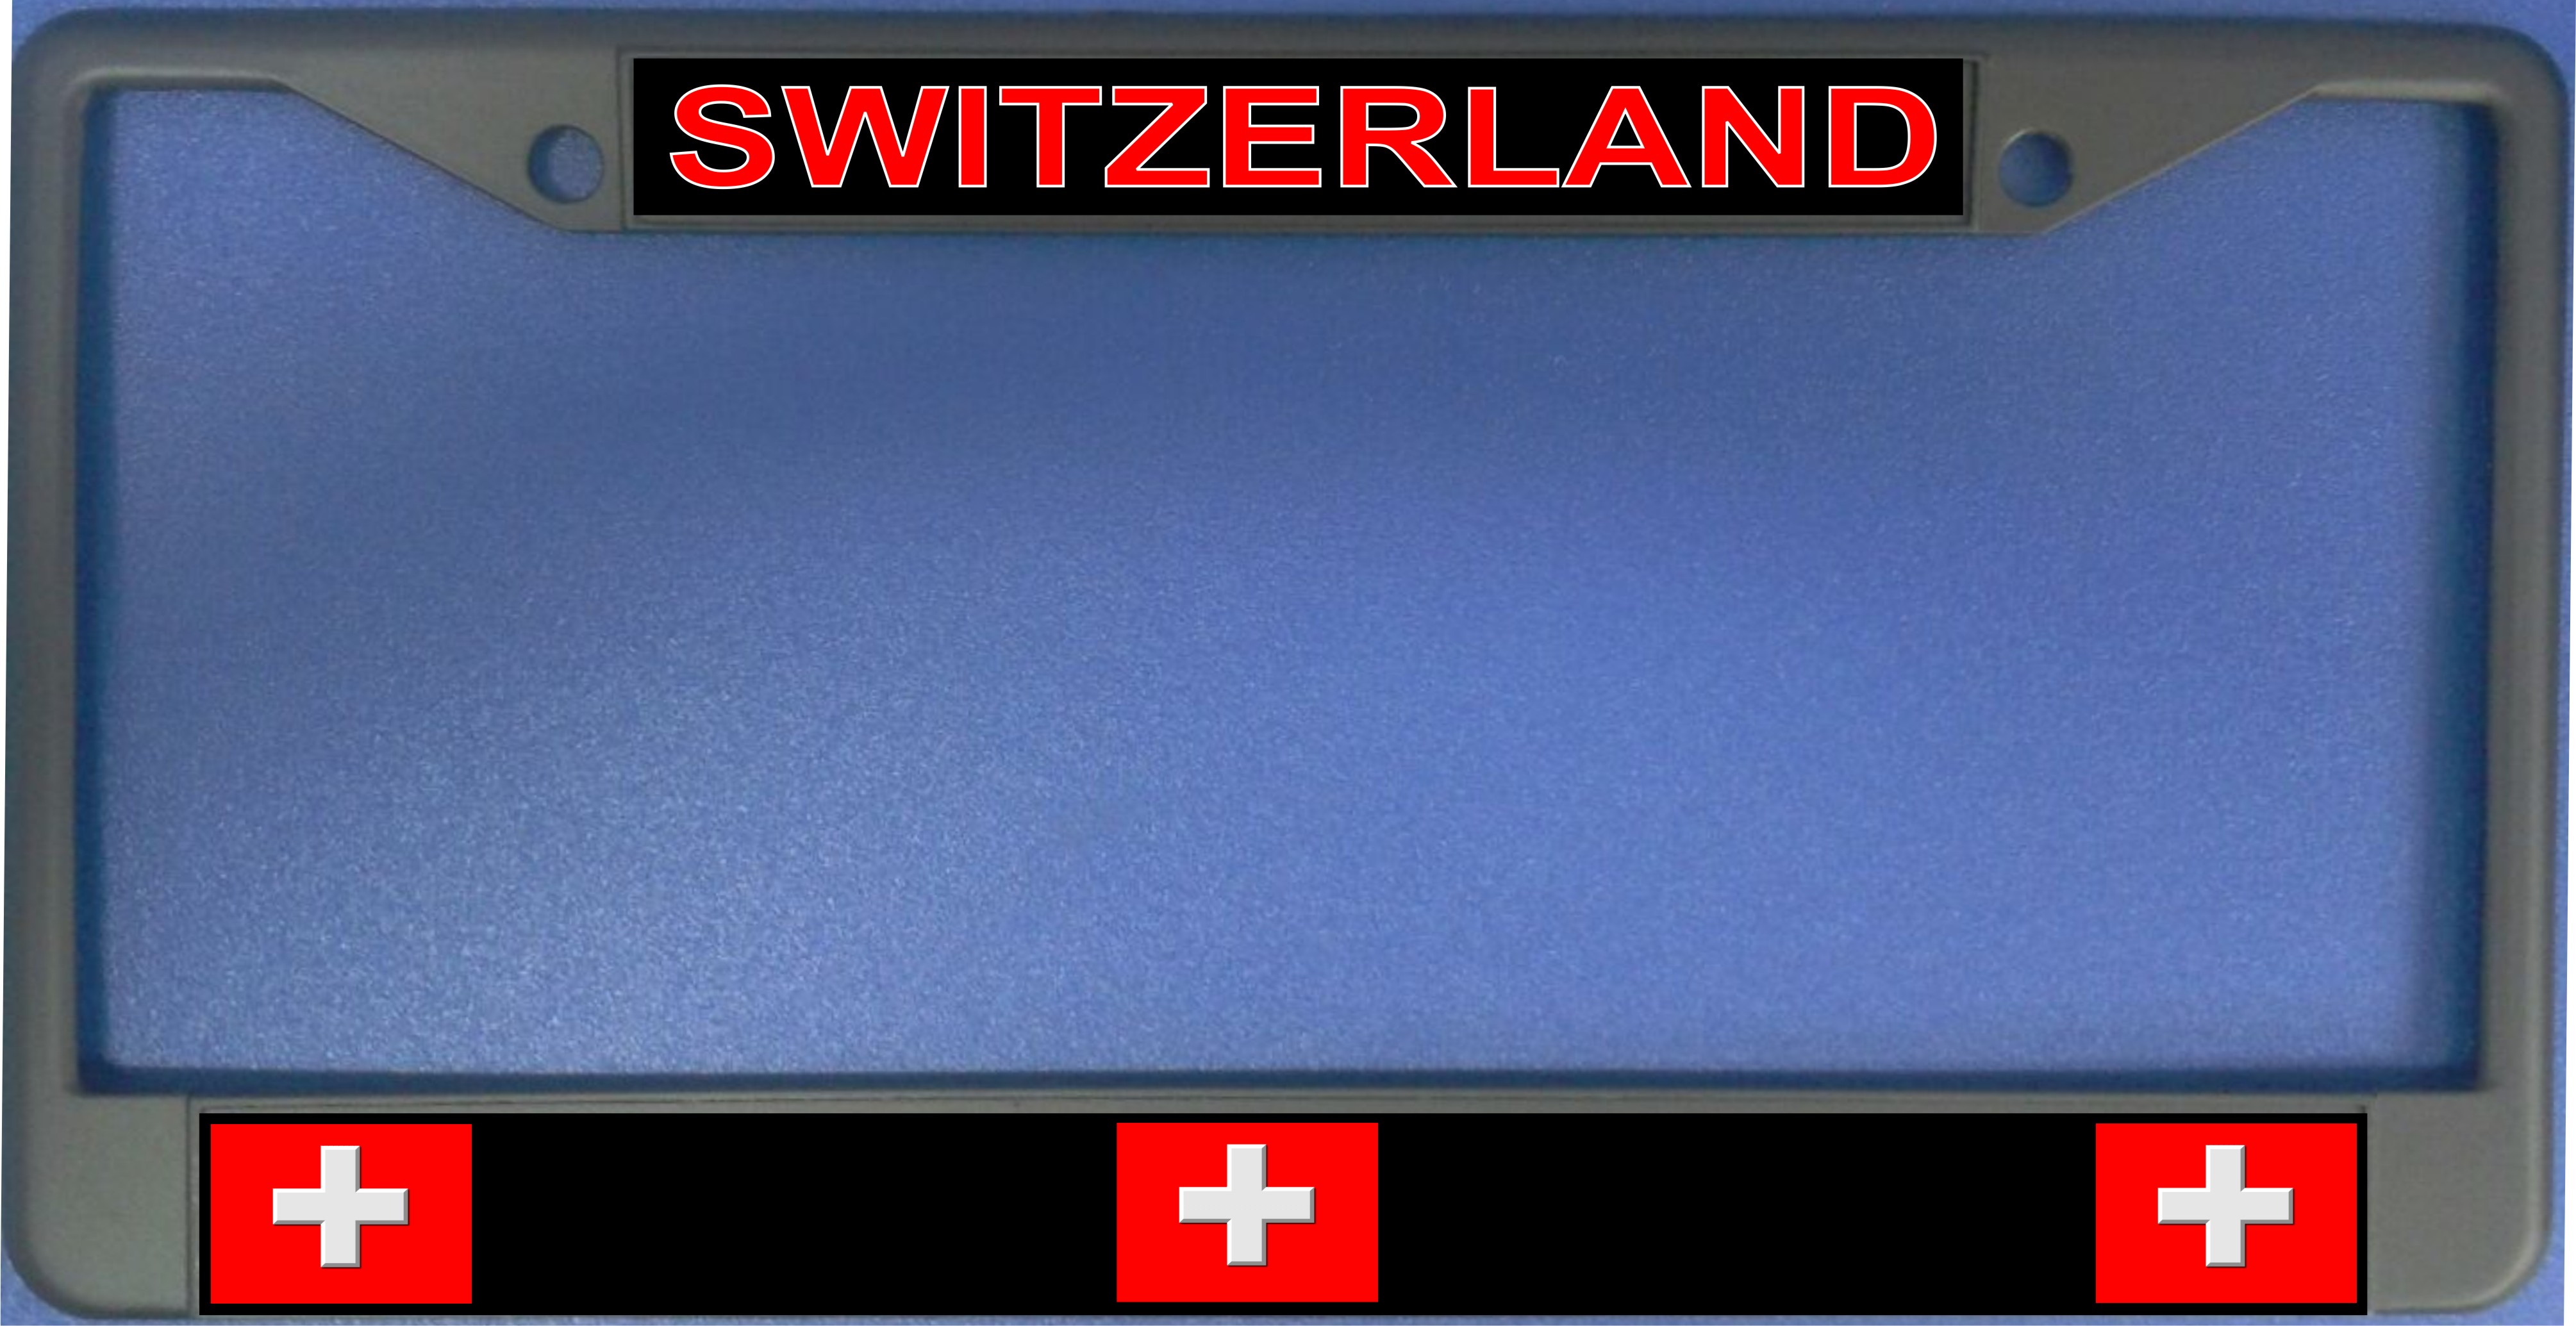 Switzerland Flag Photo License Plate Frame  Free SCREW Caps with this Frame